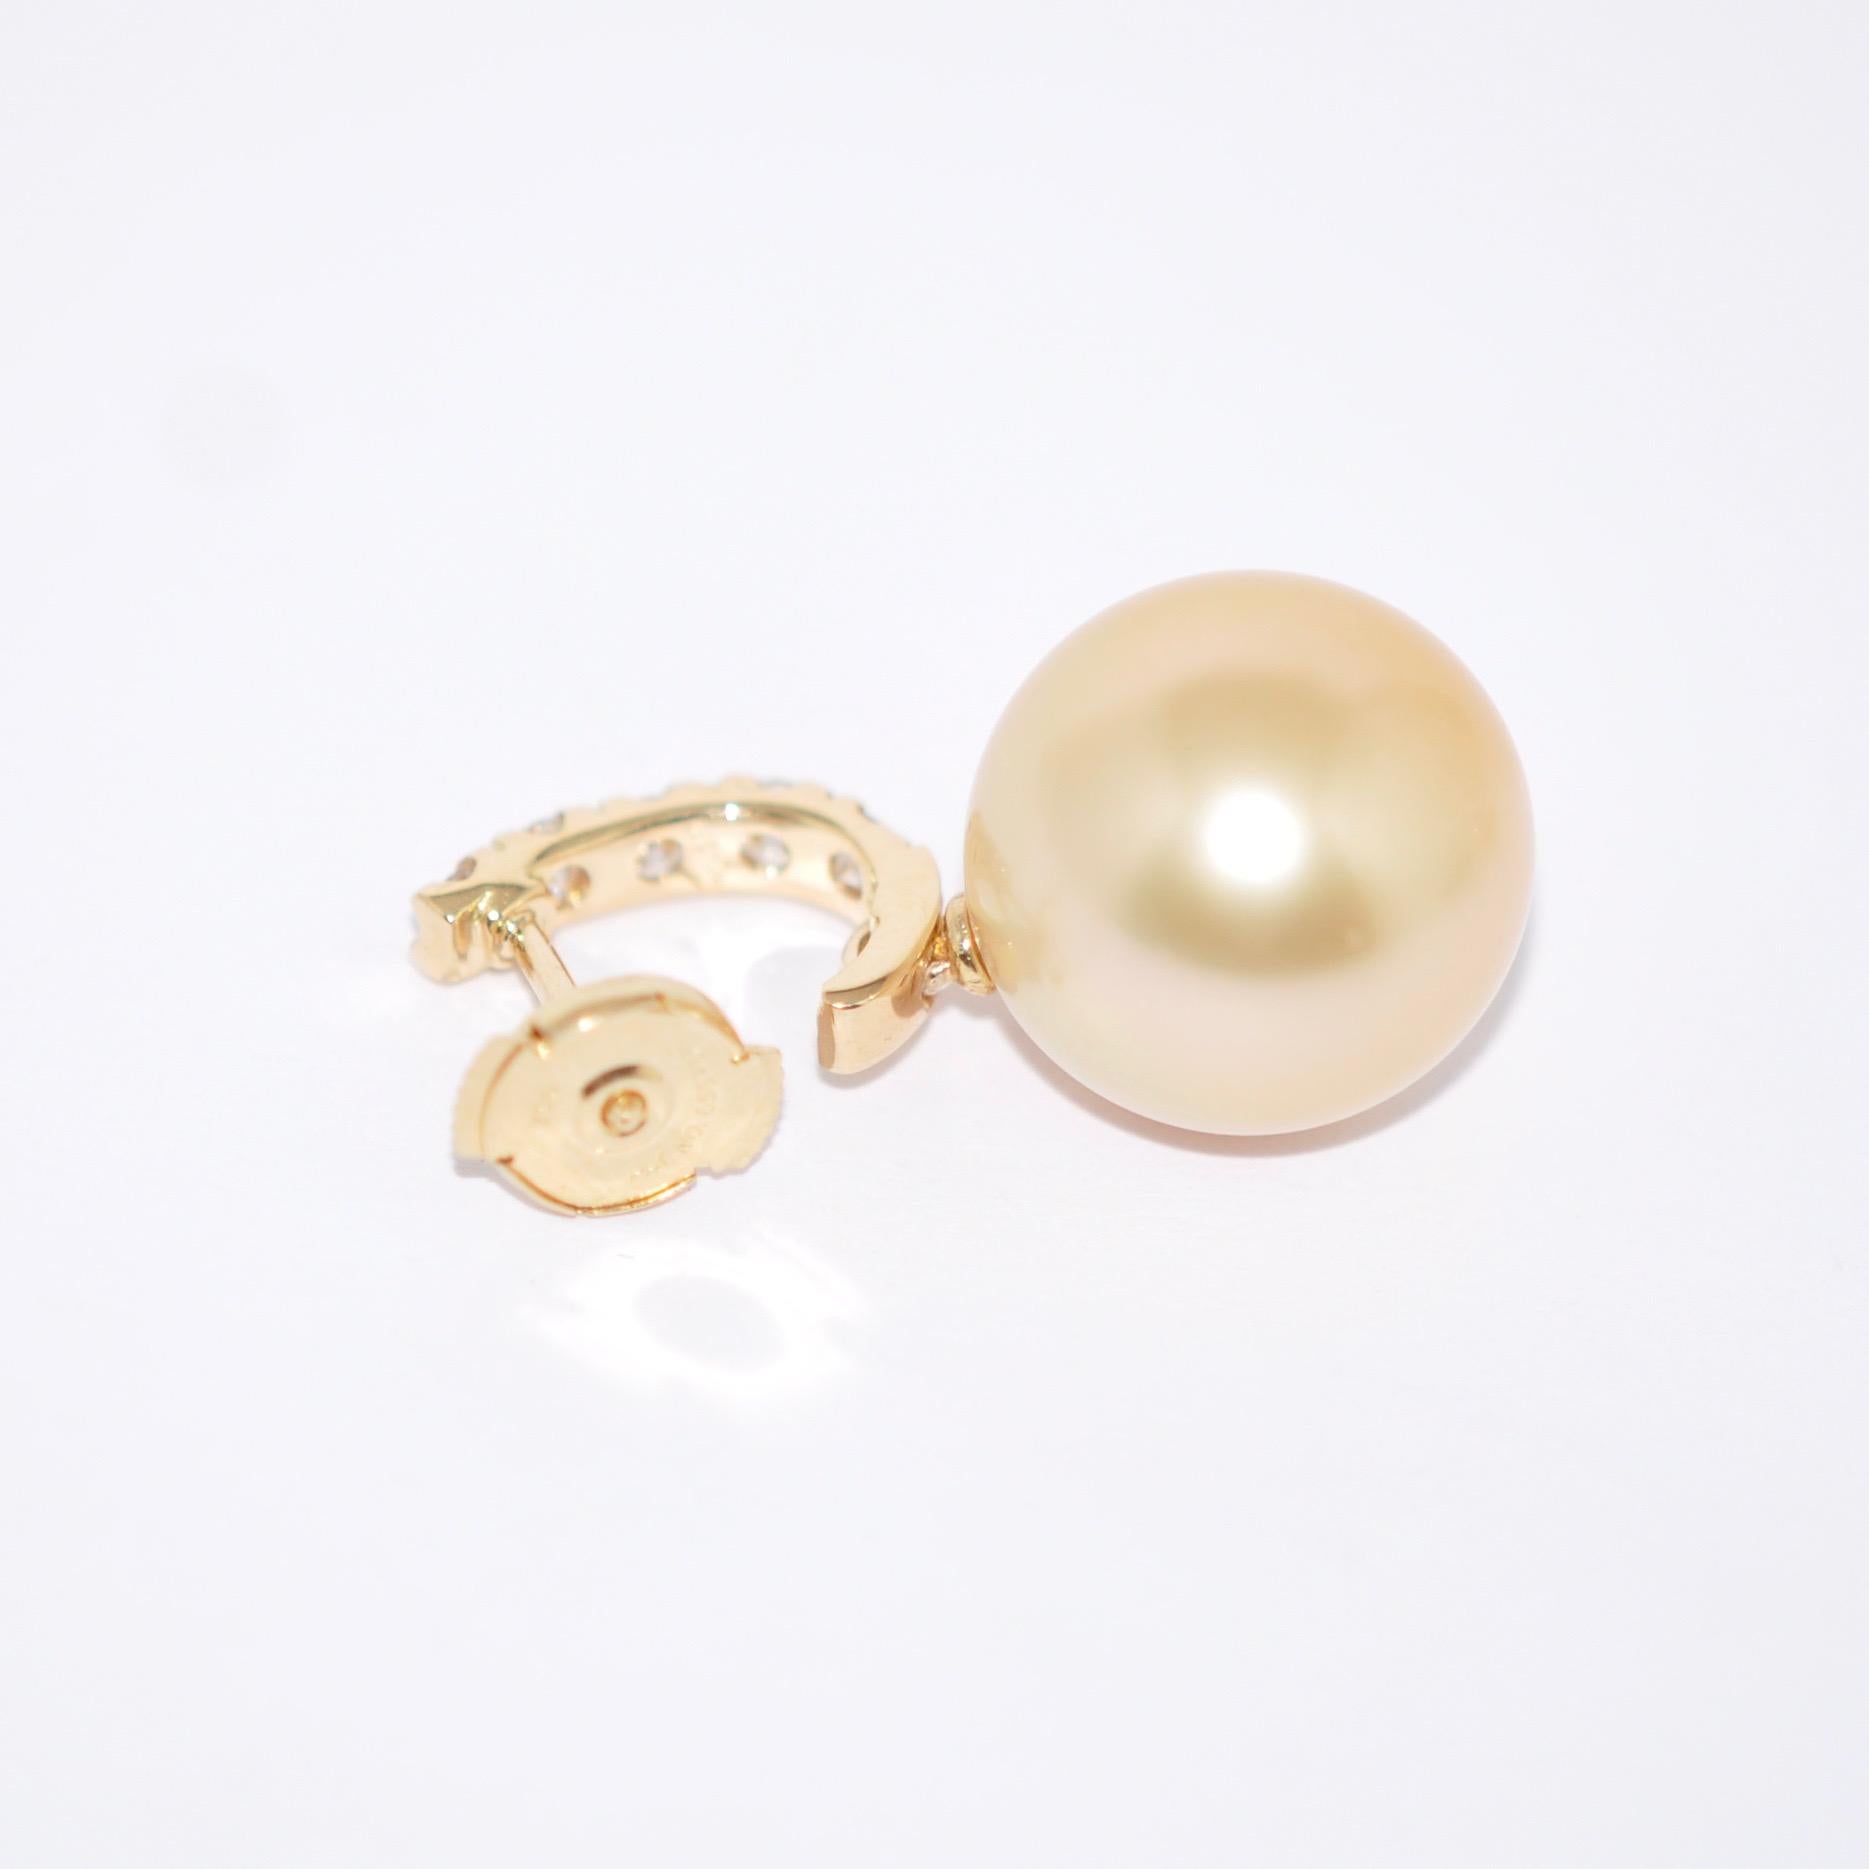 Drop Earrings South Sea Pearl White Diamonds Yellow Gold 18 Karat In New Condition For Sale In Vannes, FR